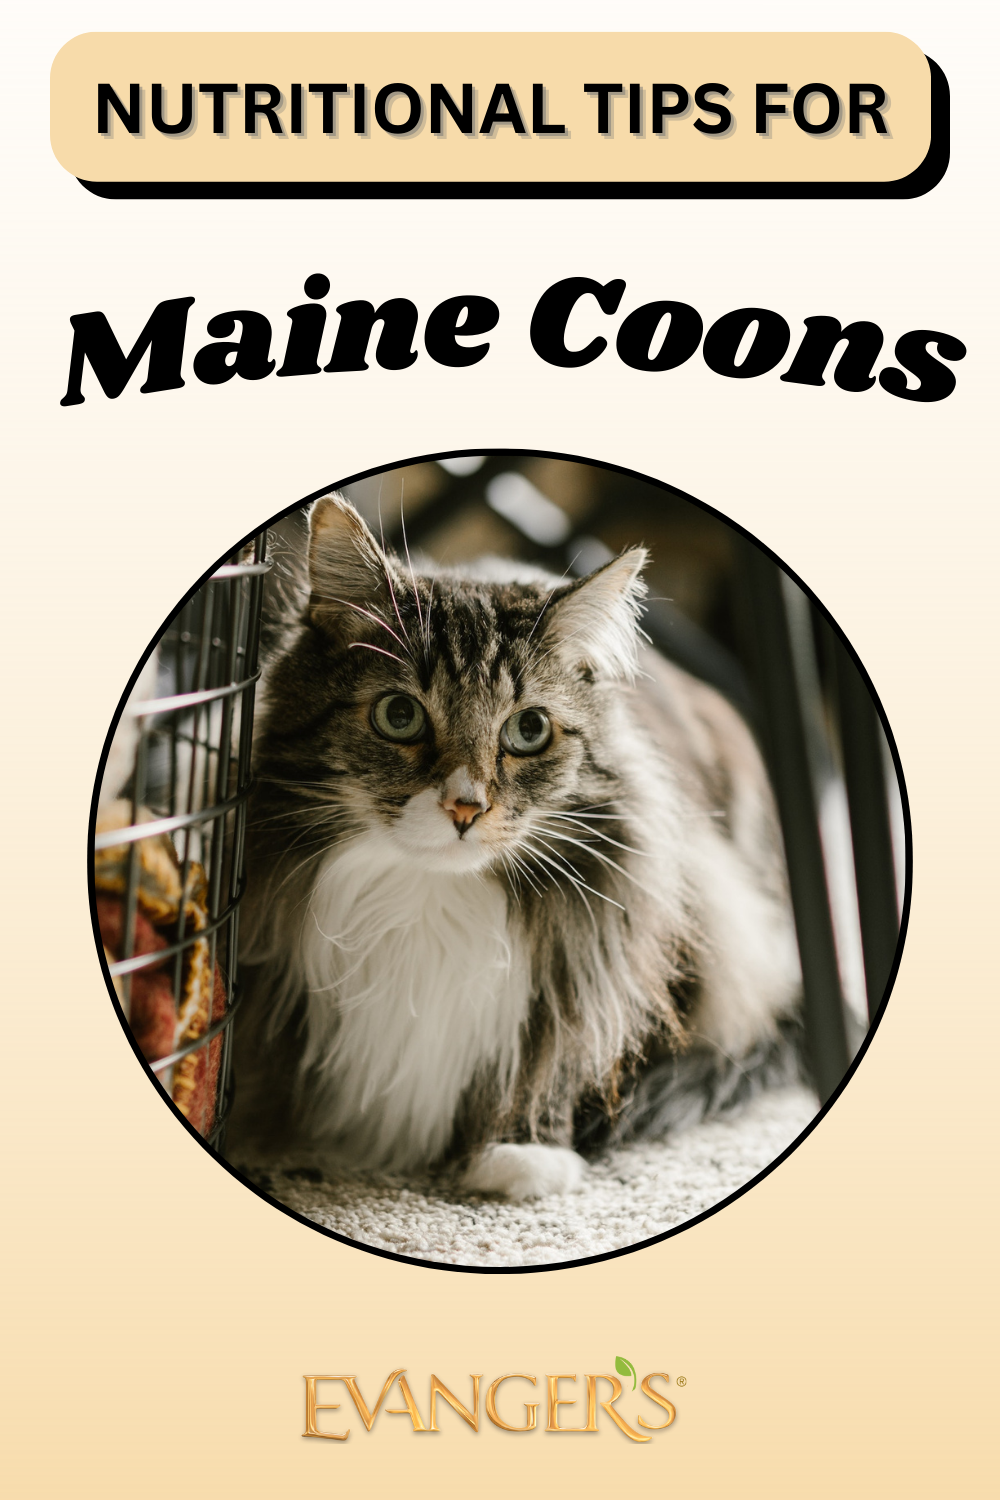 Nutritional Tips for Maine Coons